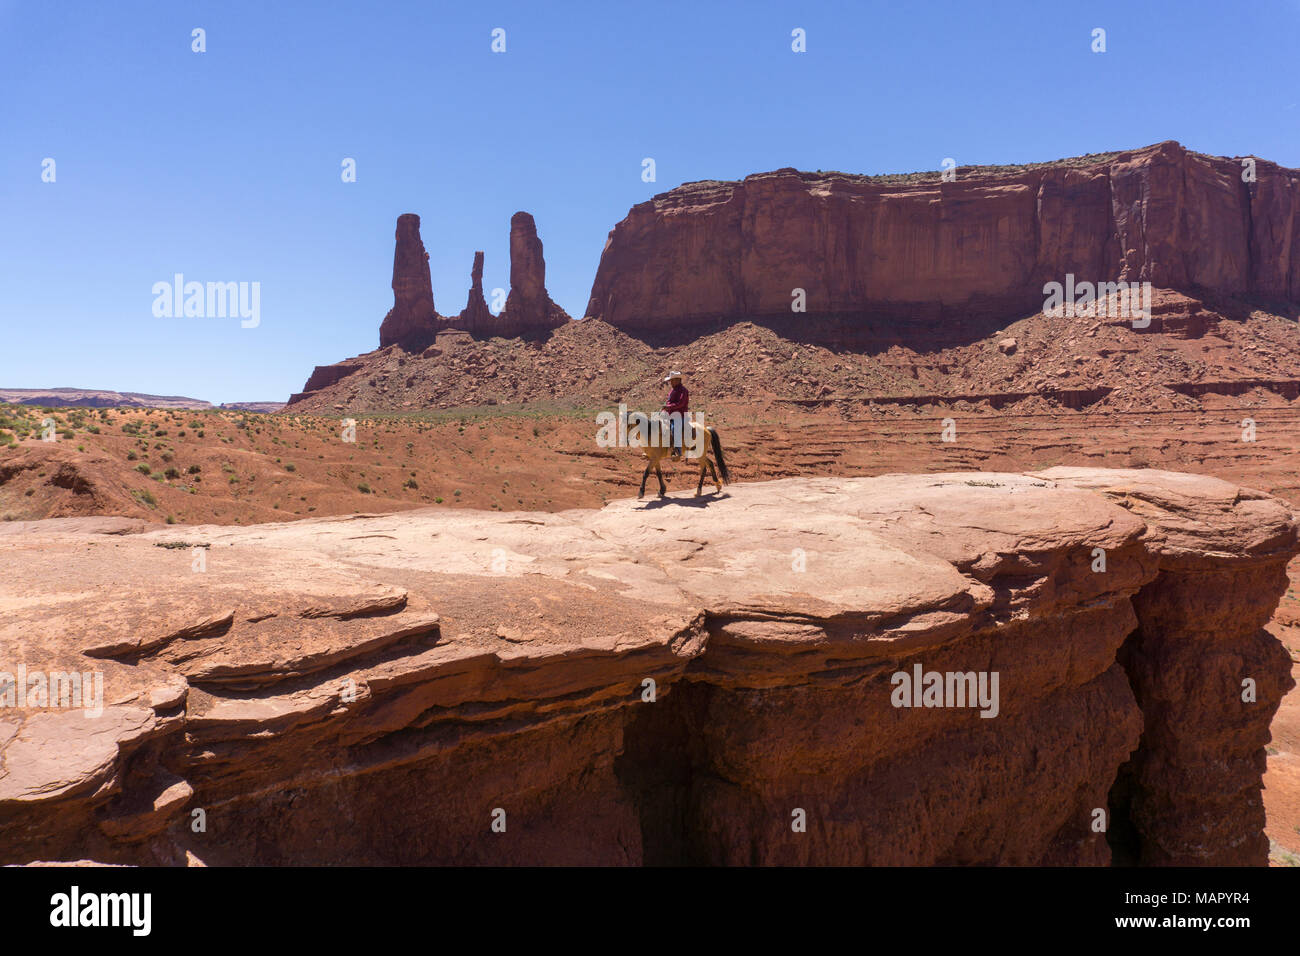 John Ford's Point and the Three Sisters and cowboy on horse, Monument Valley, border of Arizona and Utah, United States of America, North America Stock Photo